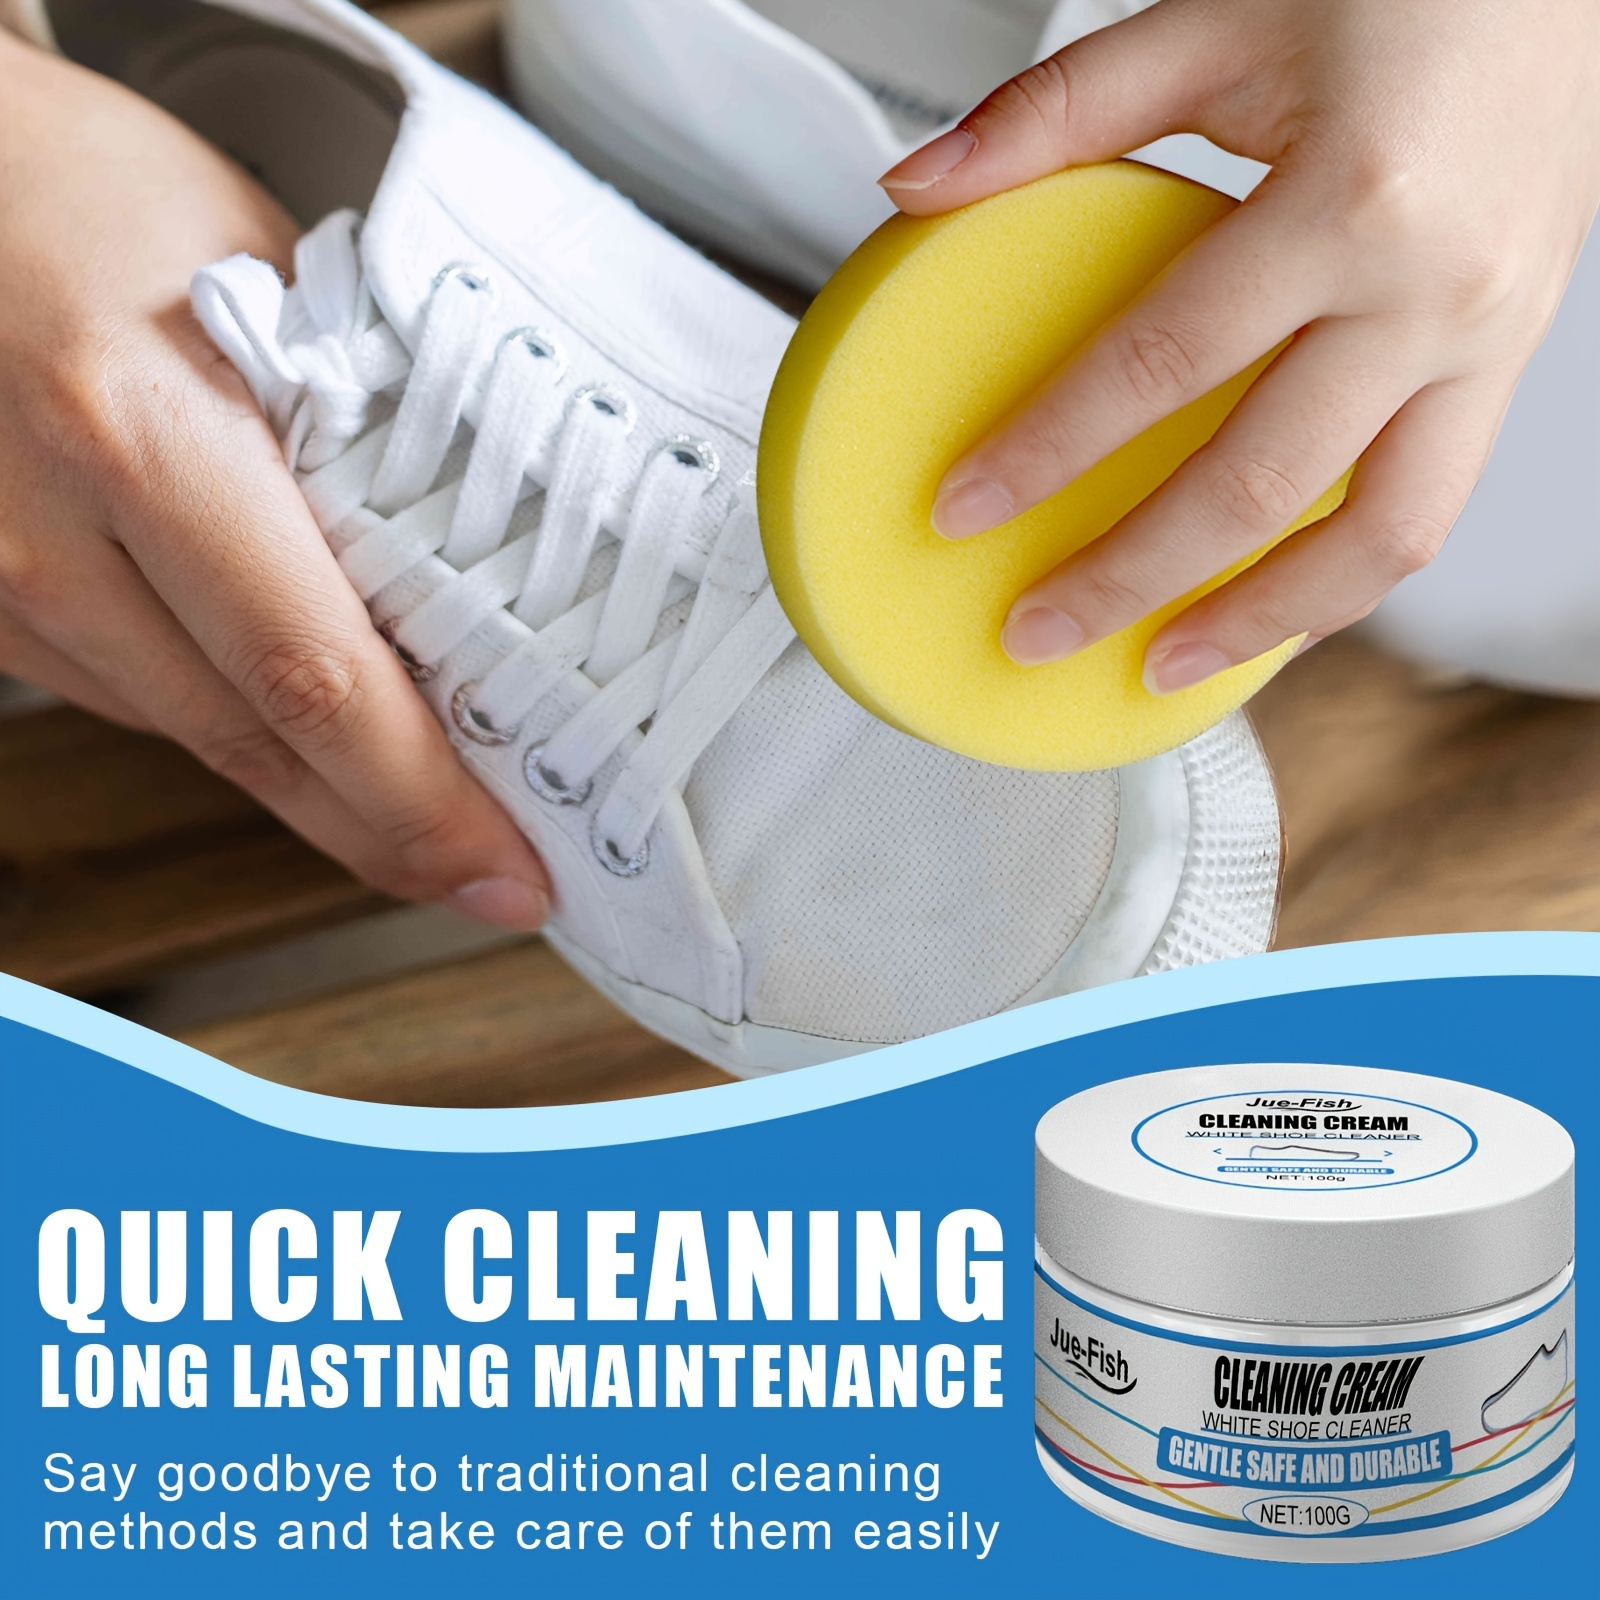  Shoes Multifunctional Cleaning Cream,Sneaker Erasers，White Shoe  Cleaner,Leather Shoe Cleaner,White Shoe Cleaning Cream with Sponge Eraser  (1pcs) : Clothing, Shoes & Jewelry